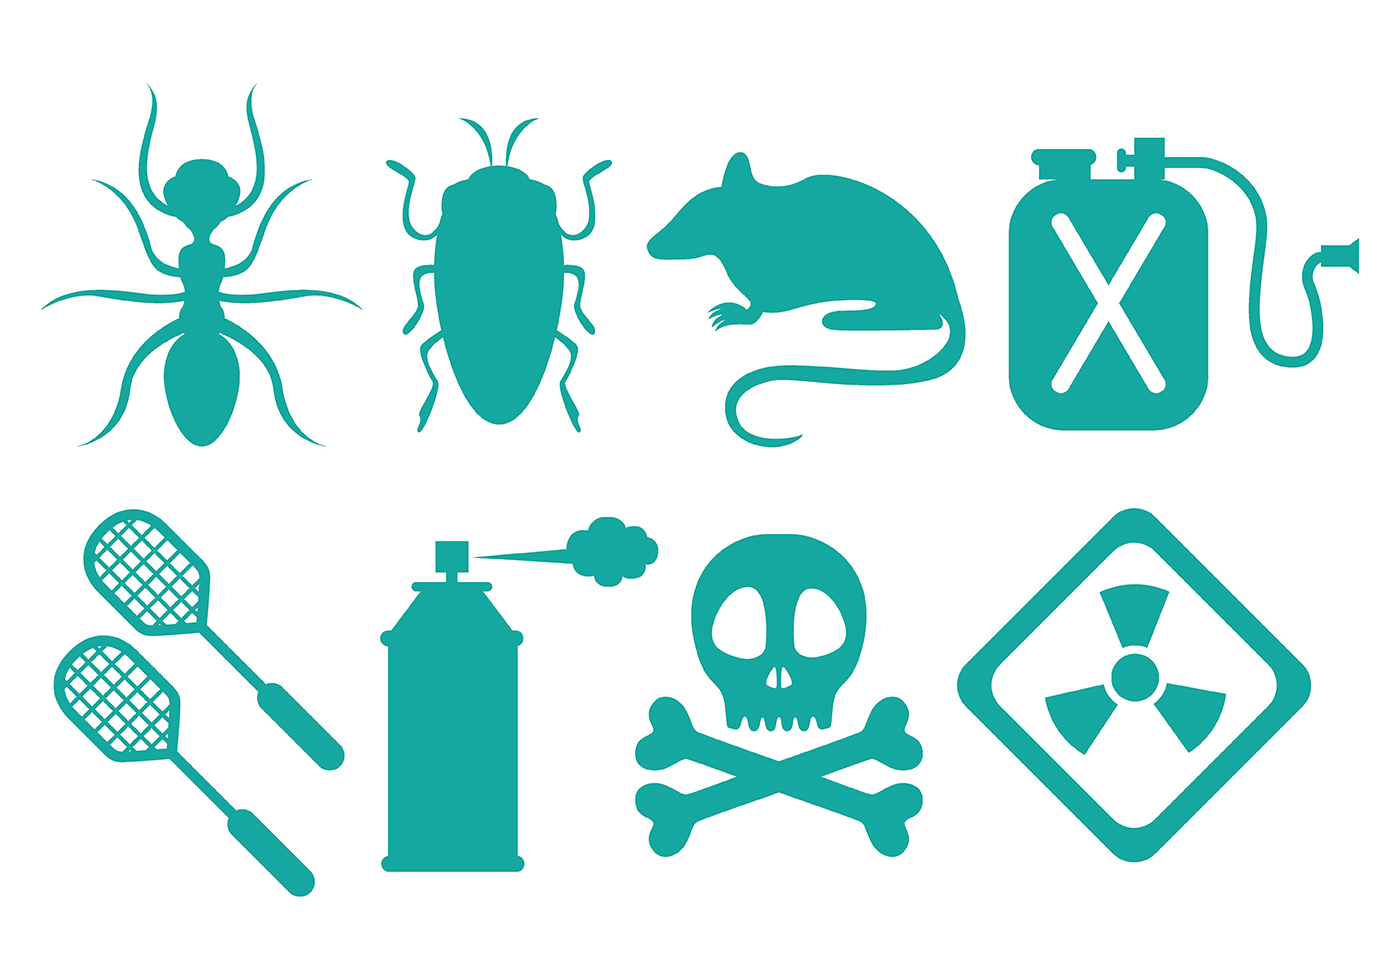 Download the Pest control icons 121402